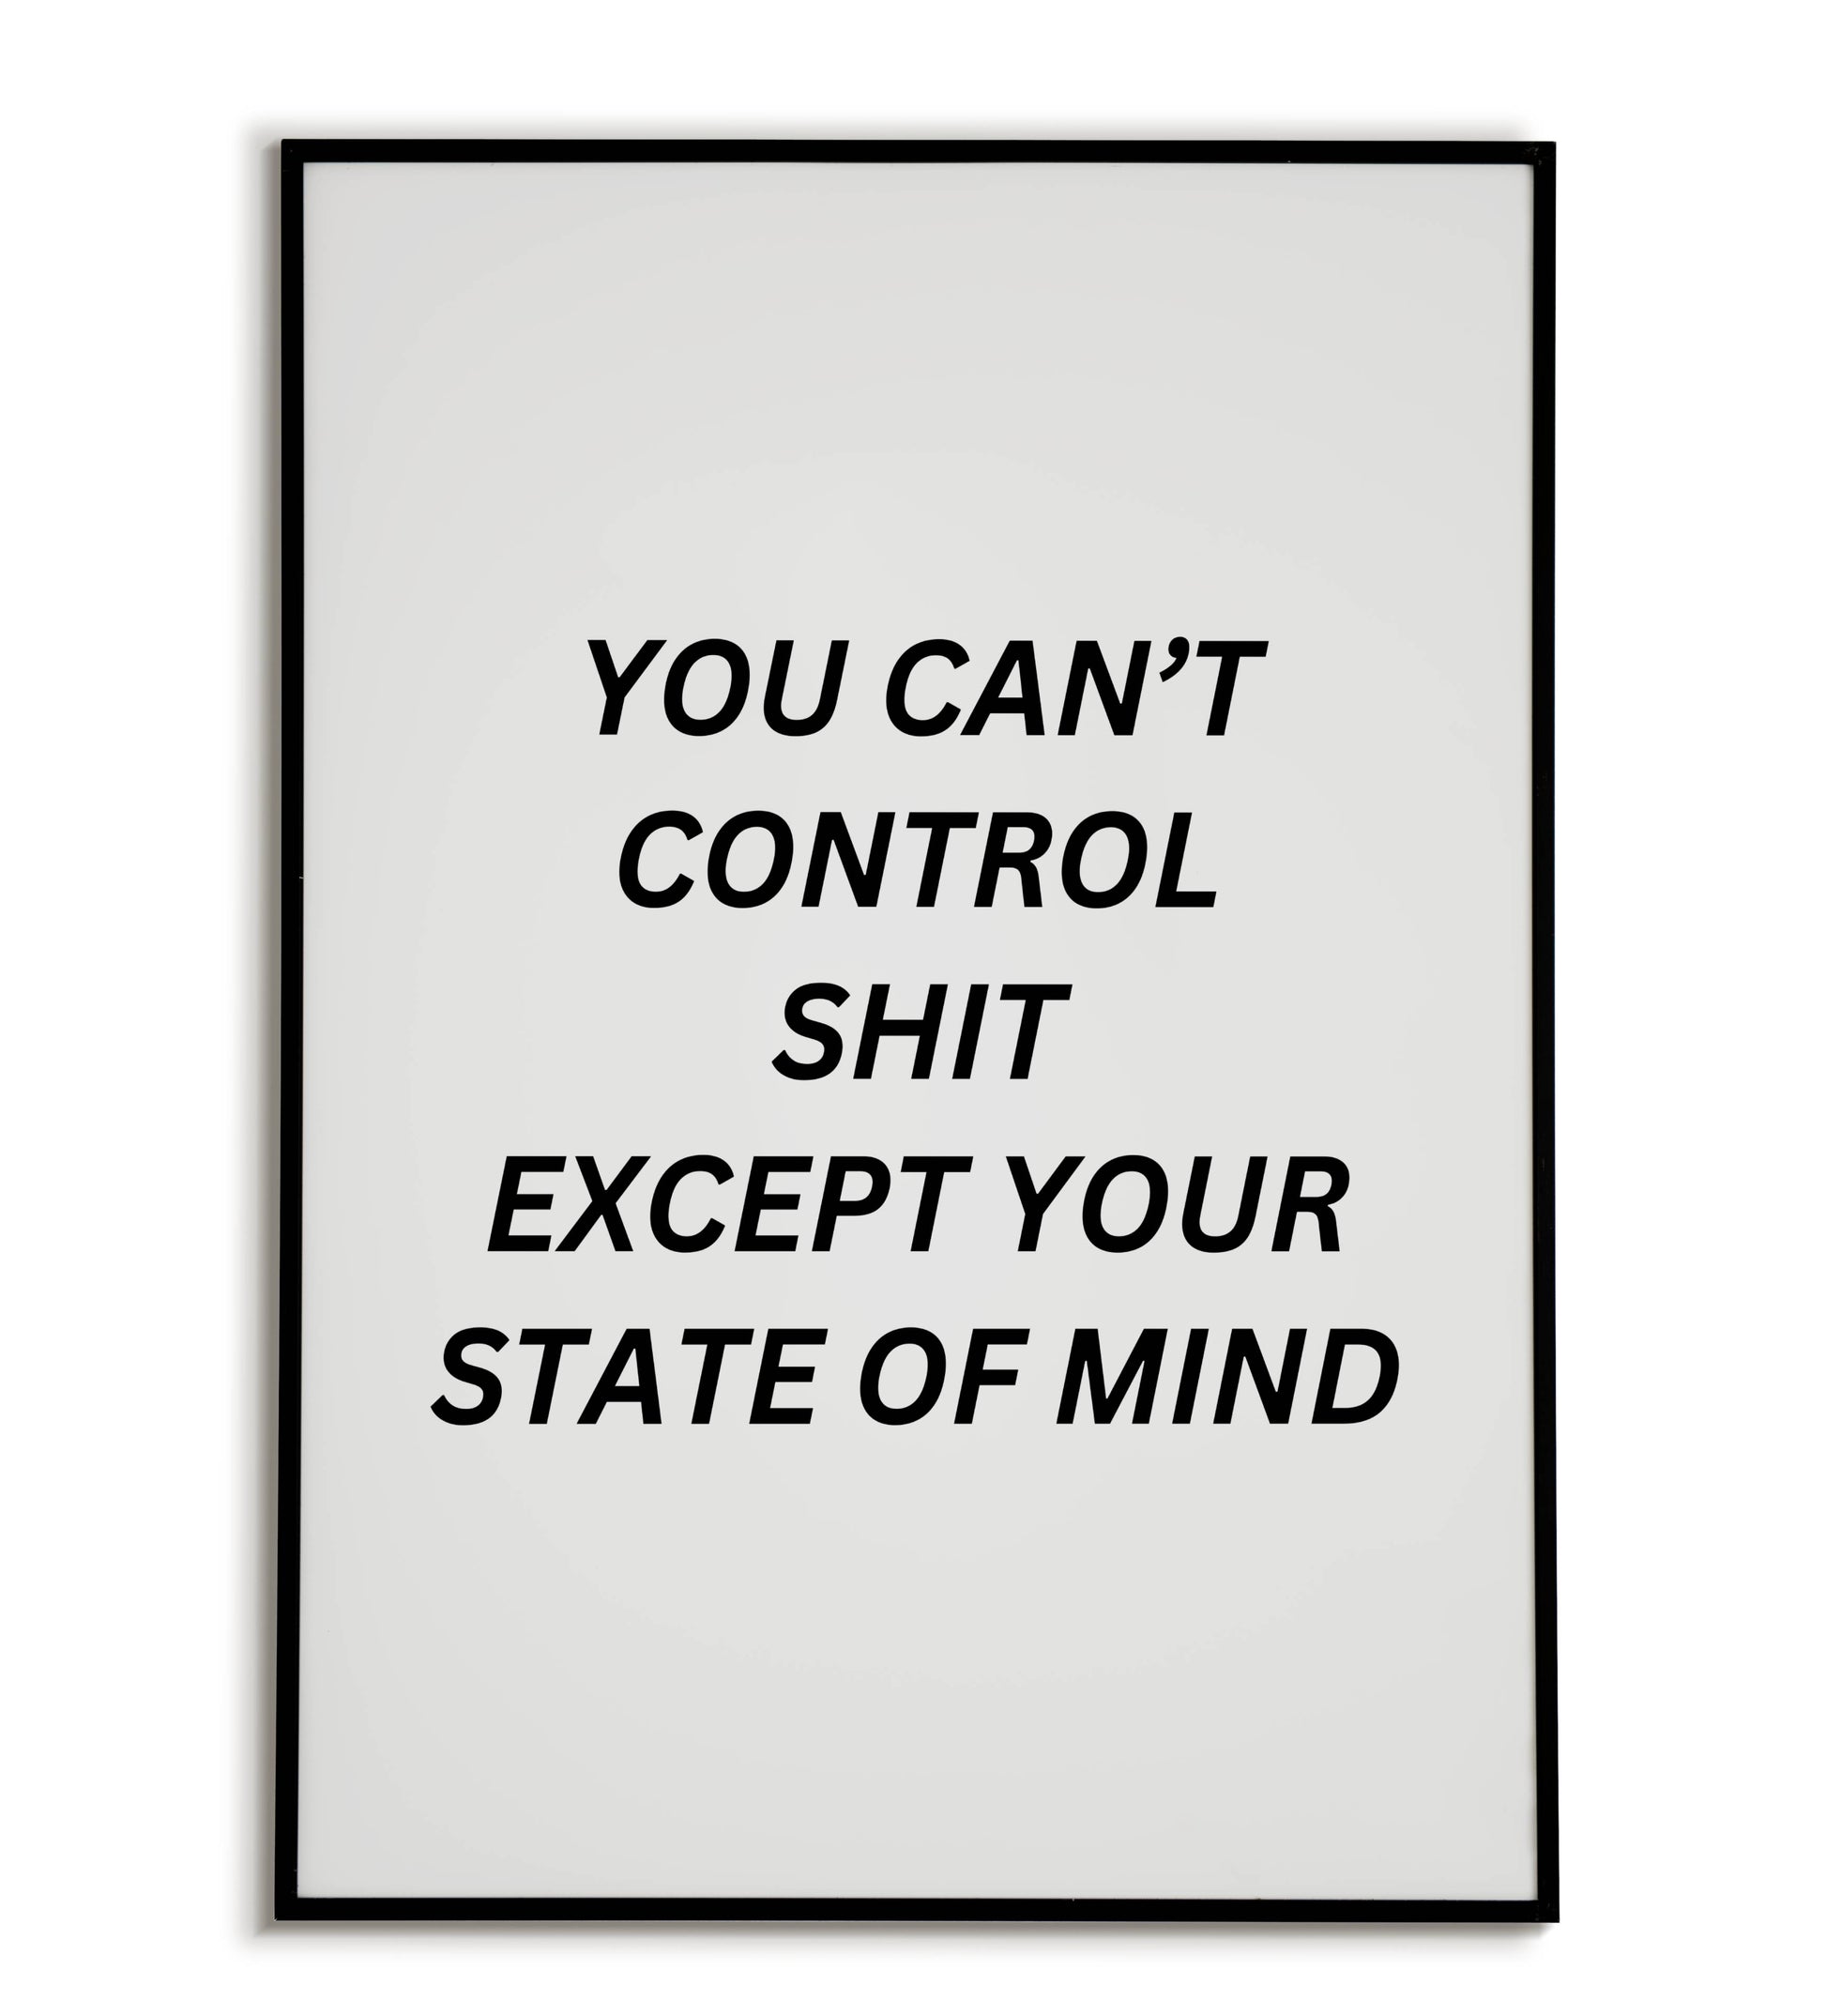 You can't control shit except your state of mind" typographic motivational poster